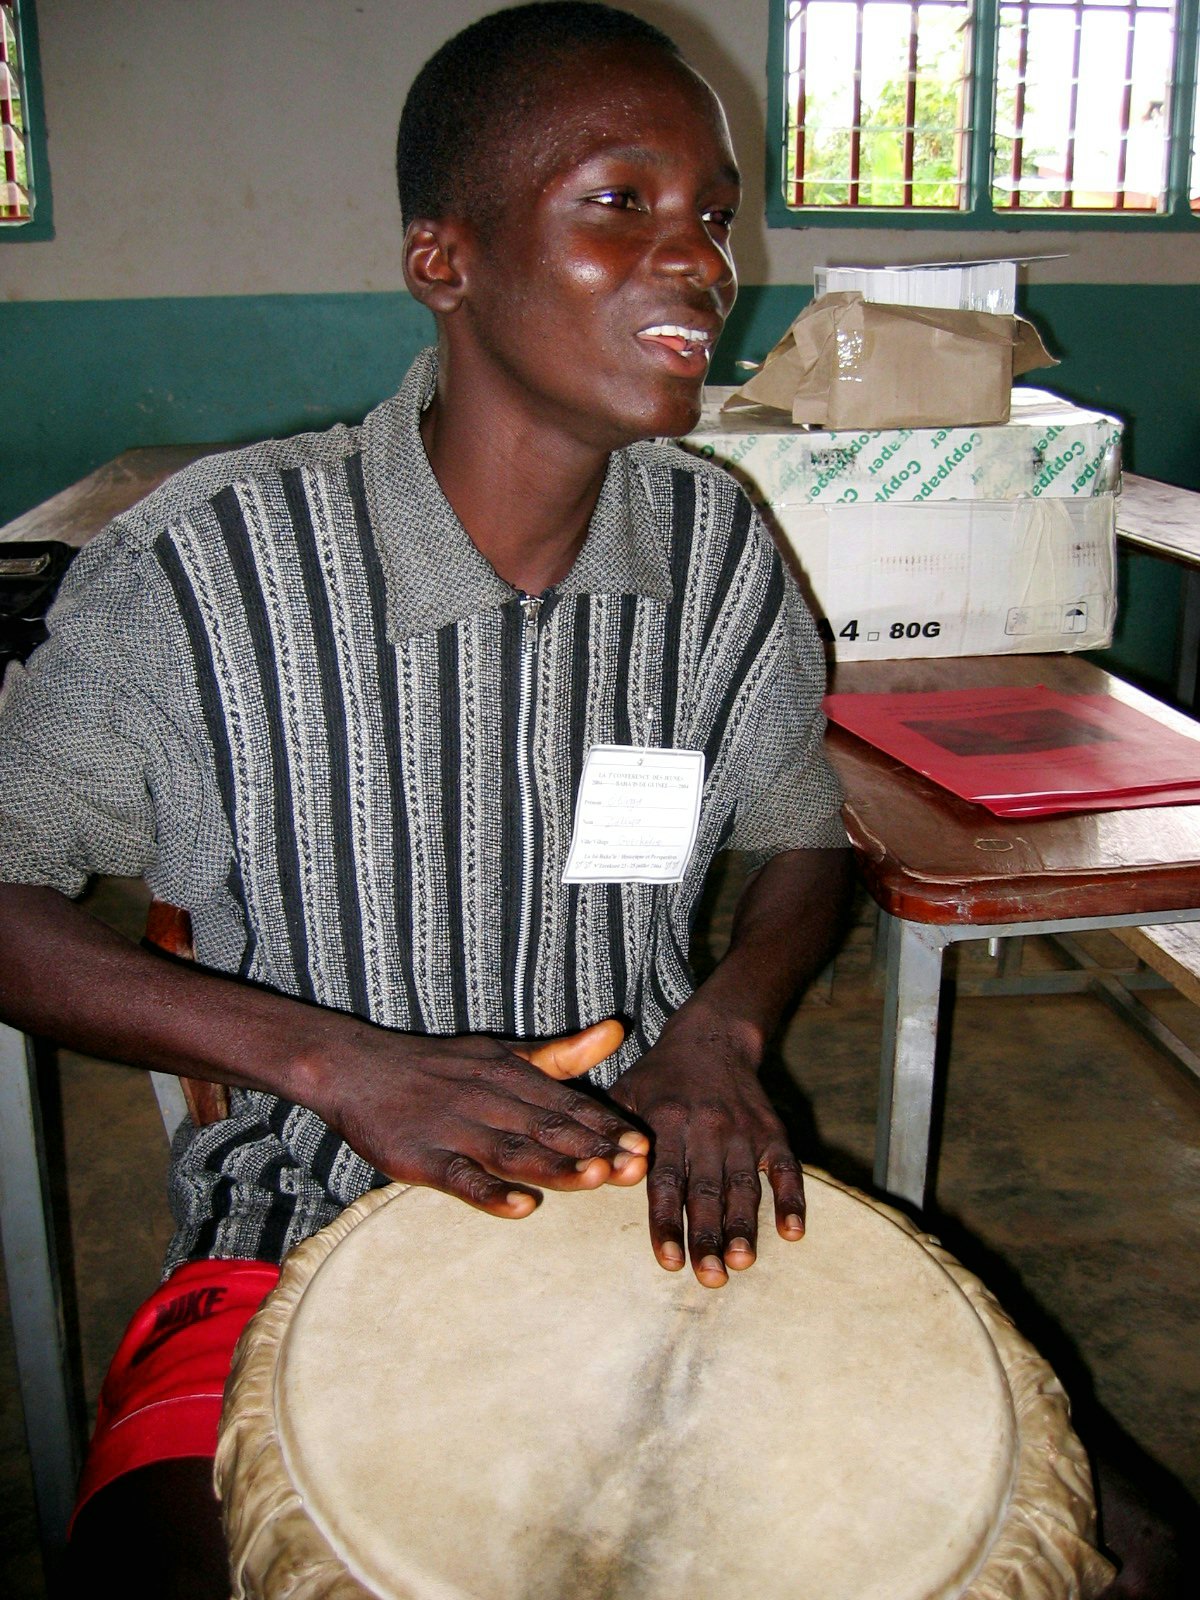 Olinga Daliwa, 18, a Baha'i from Togo, who has lived with his family in Gueckedou, Guinea, for the past three years.